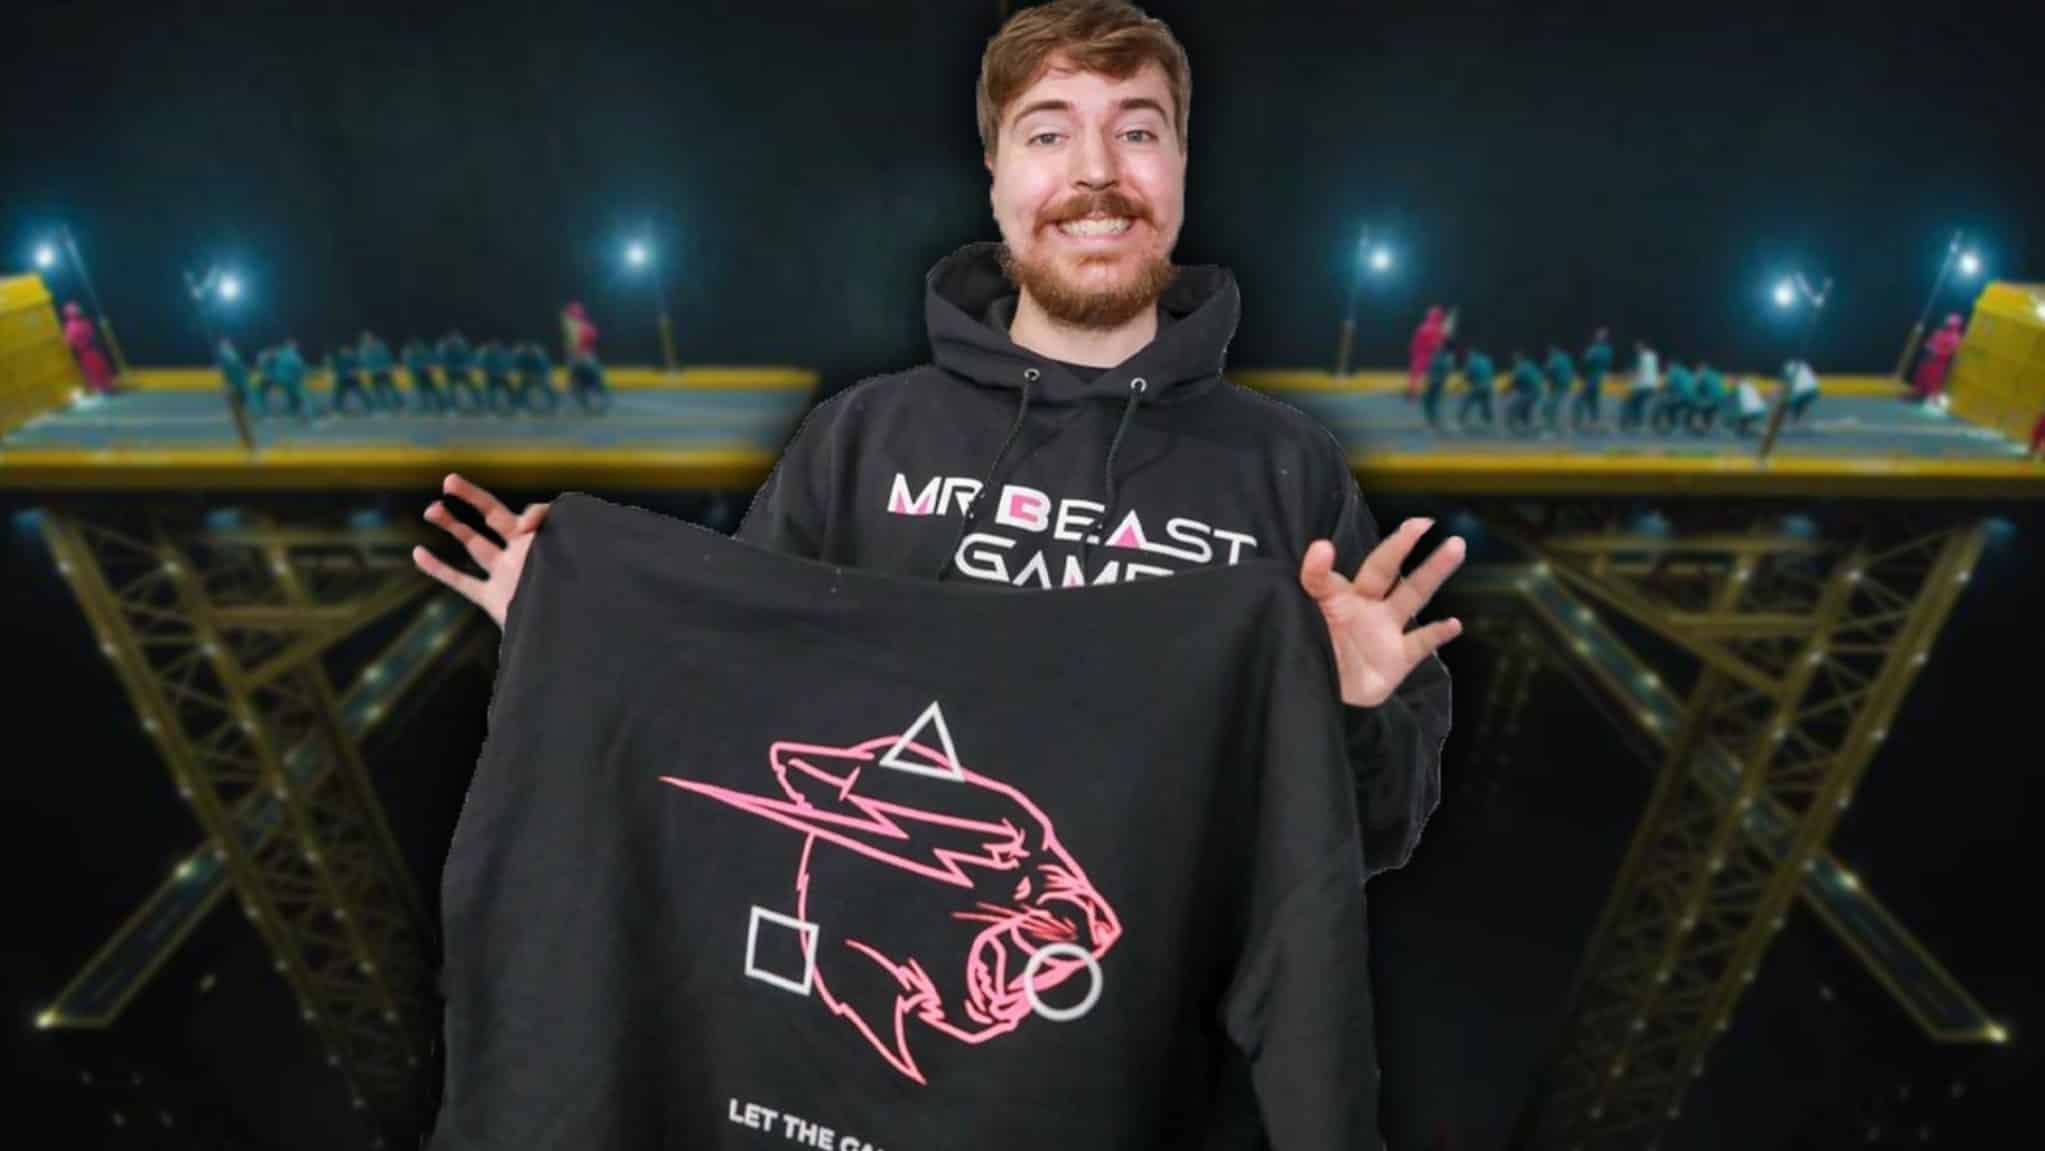 Who is MrBeast & why does he keep appearing on our Instagram